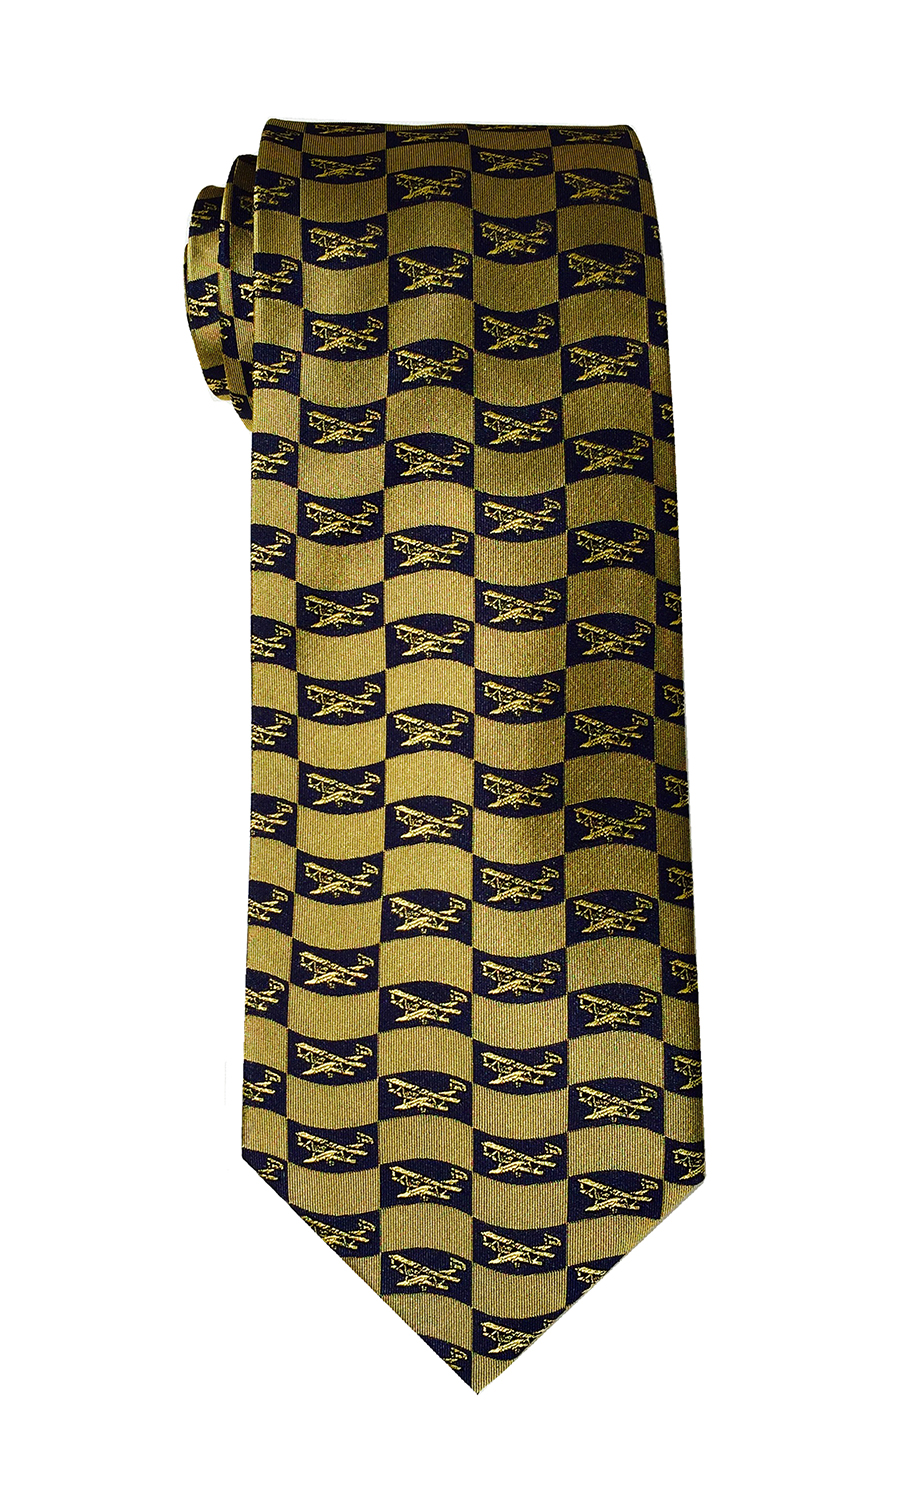 Handley Page airplane tie in midnight and gold